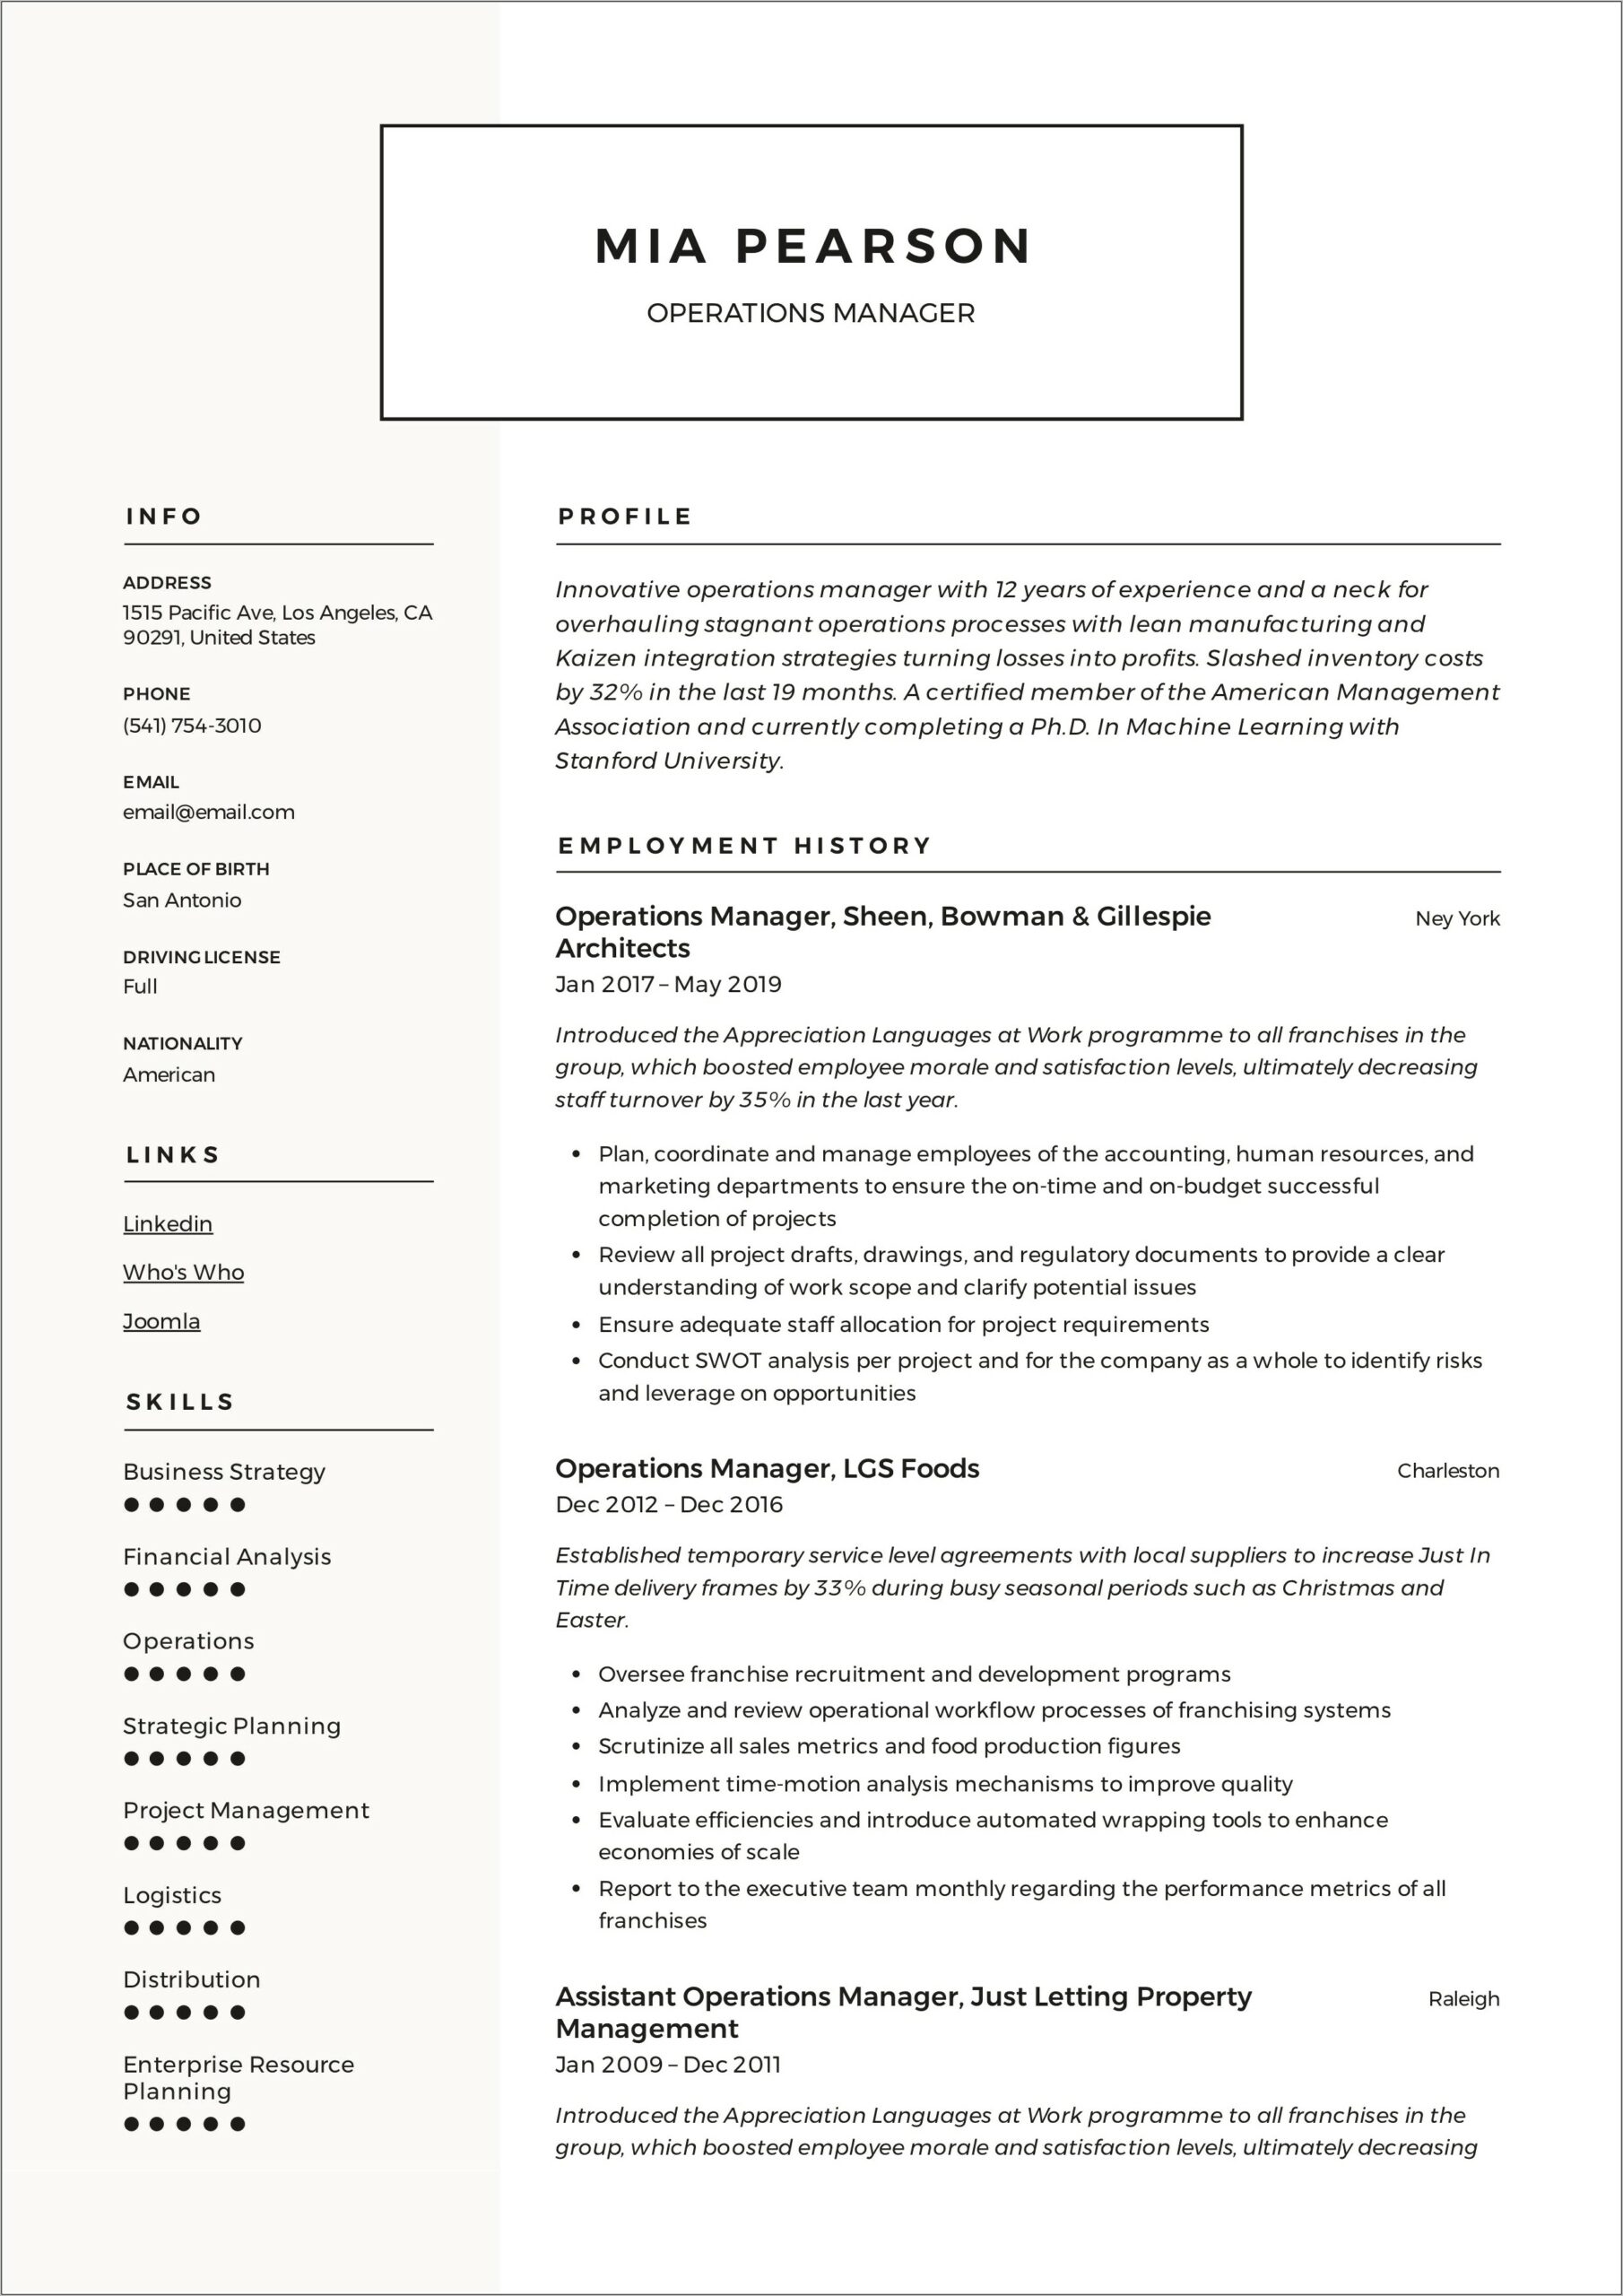 Resume Format For It Operation Manager